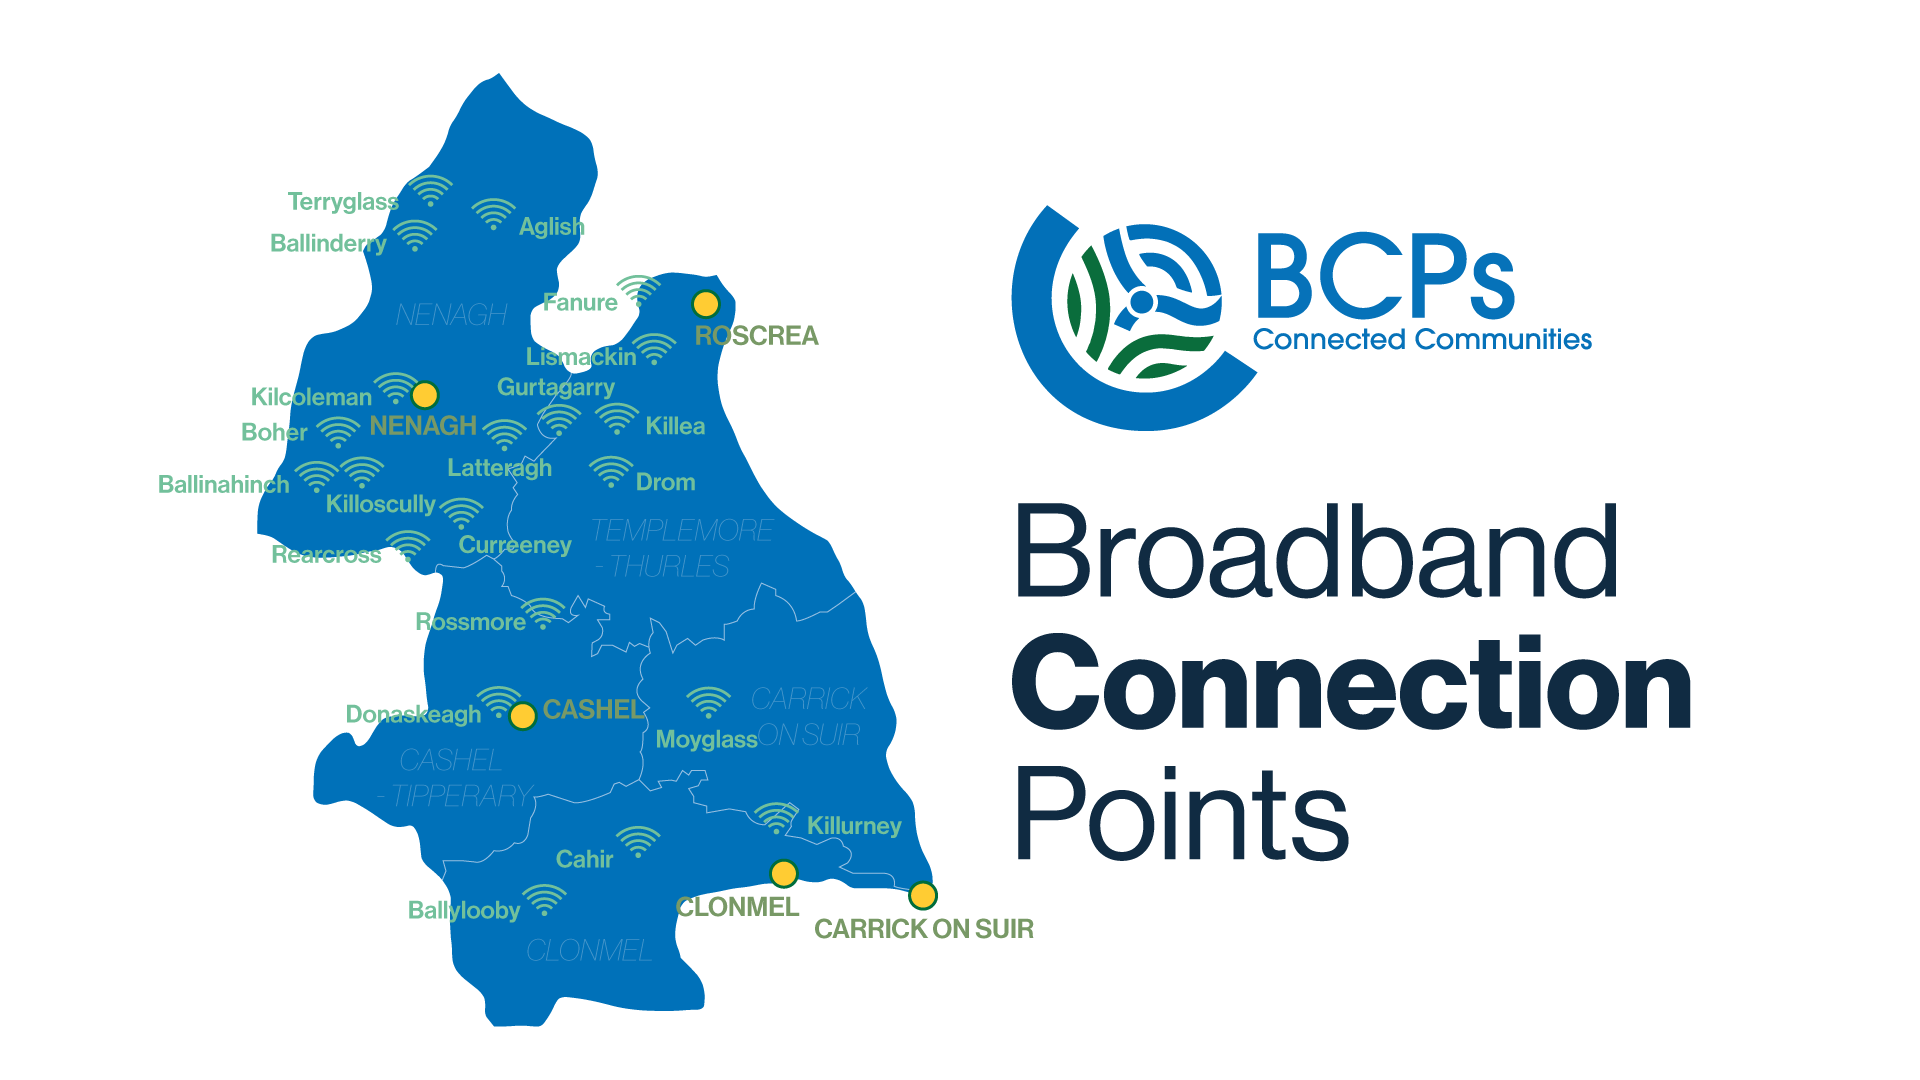 Broadband Connection Points